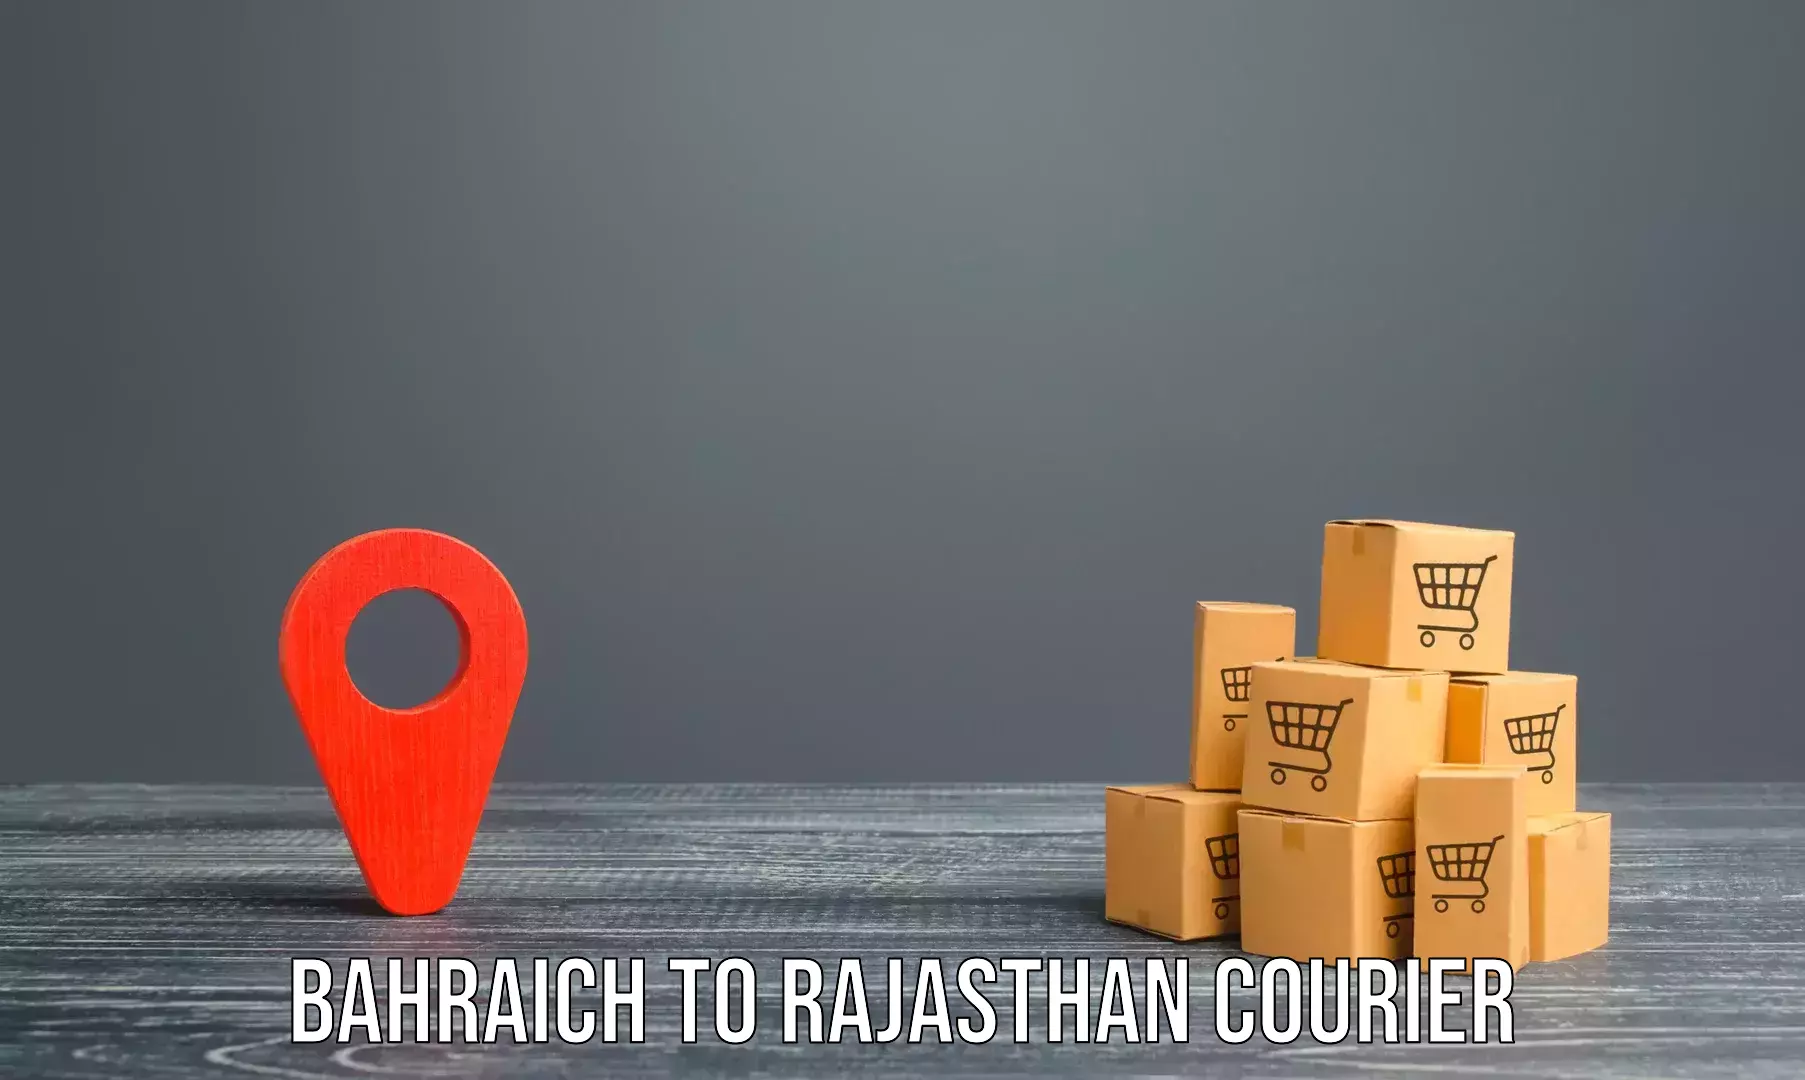 Furniture delivery service Bahraich to Dholpur